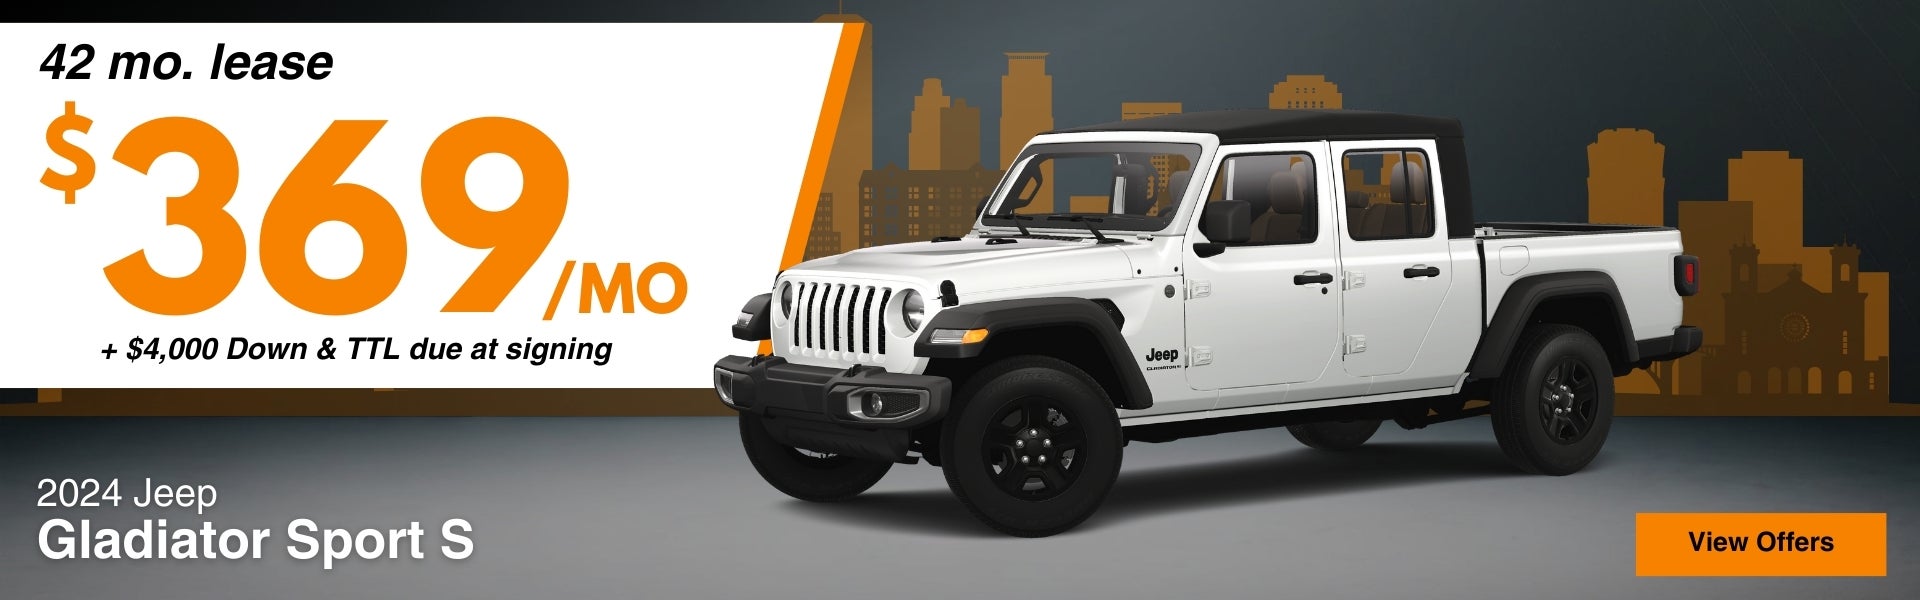 2024 Jeep Gladiator Lease Offer